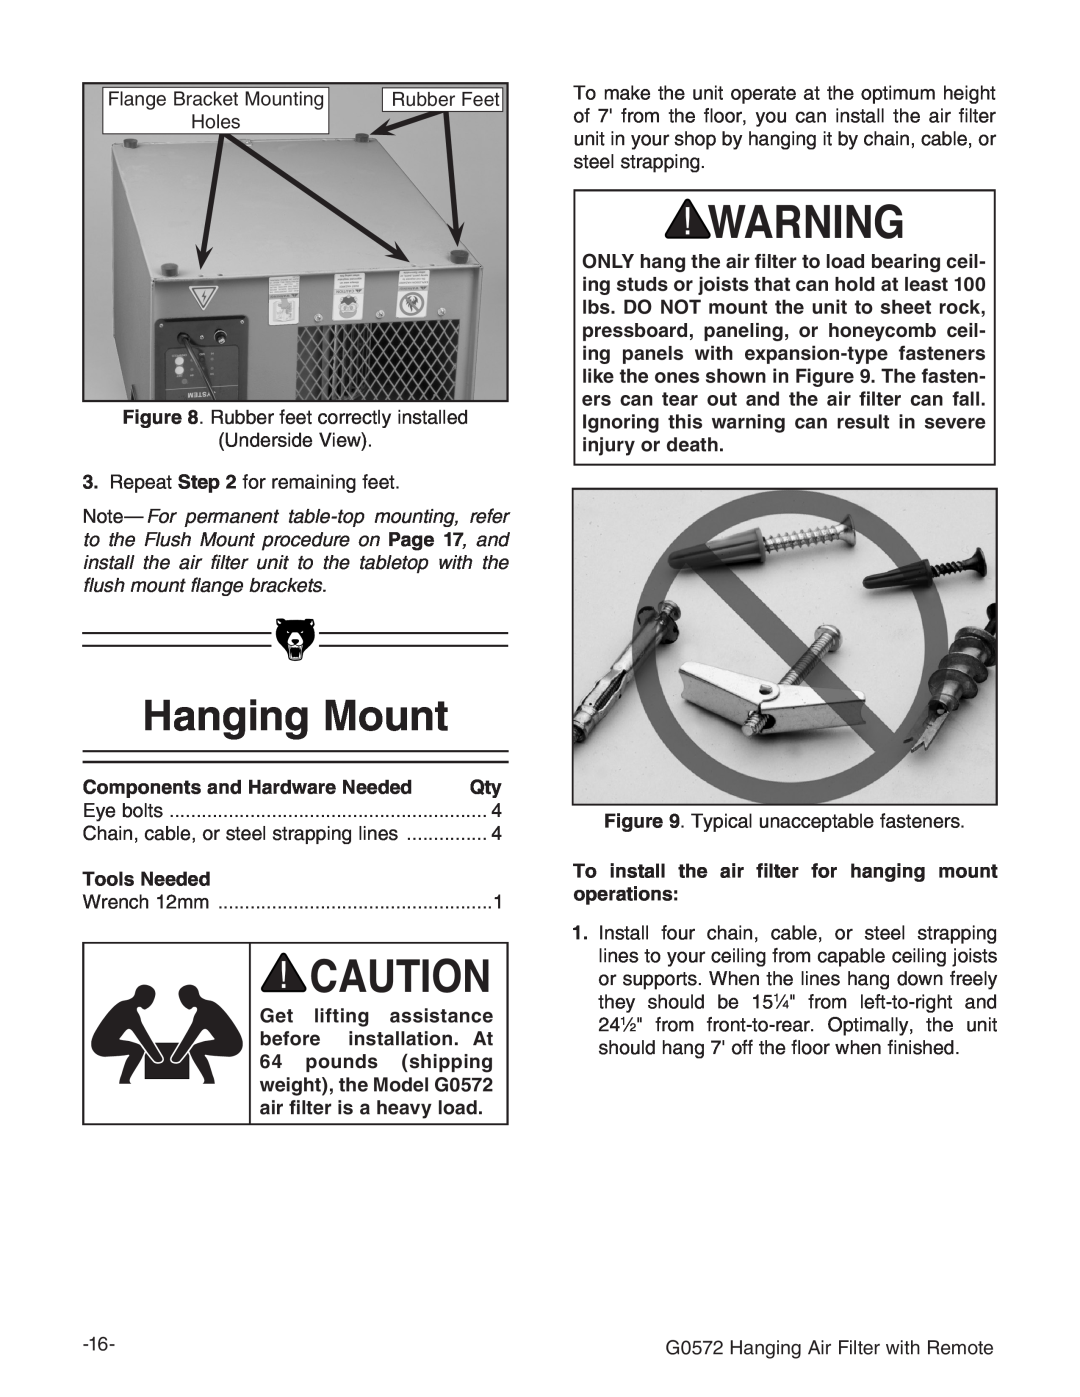 Grizzly G0572 instruction manual Hanging Mount 